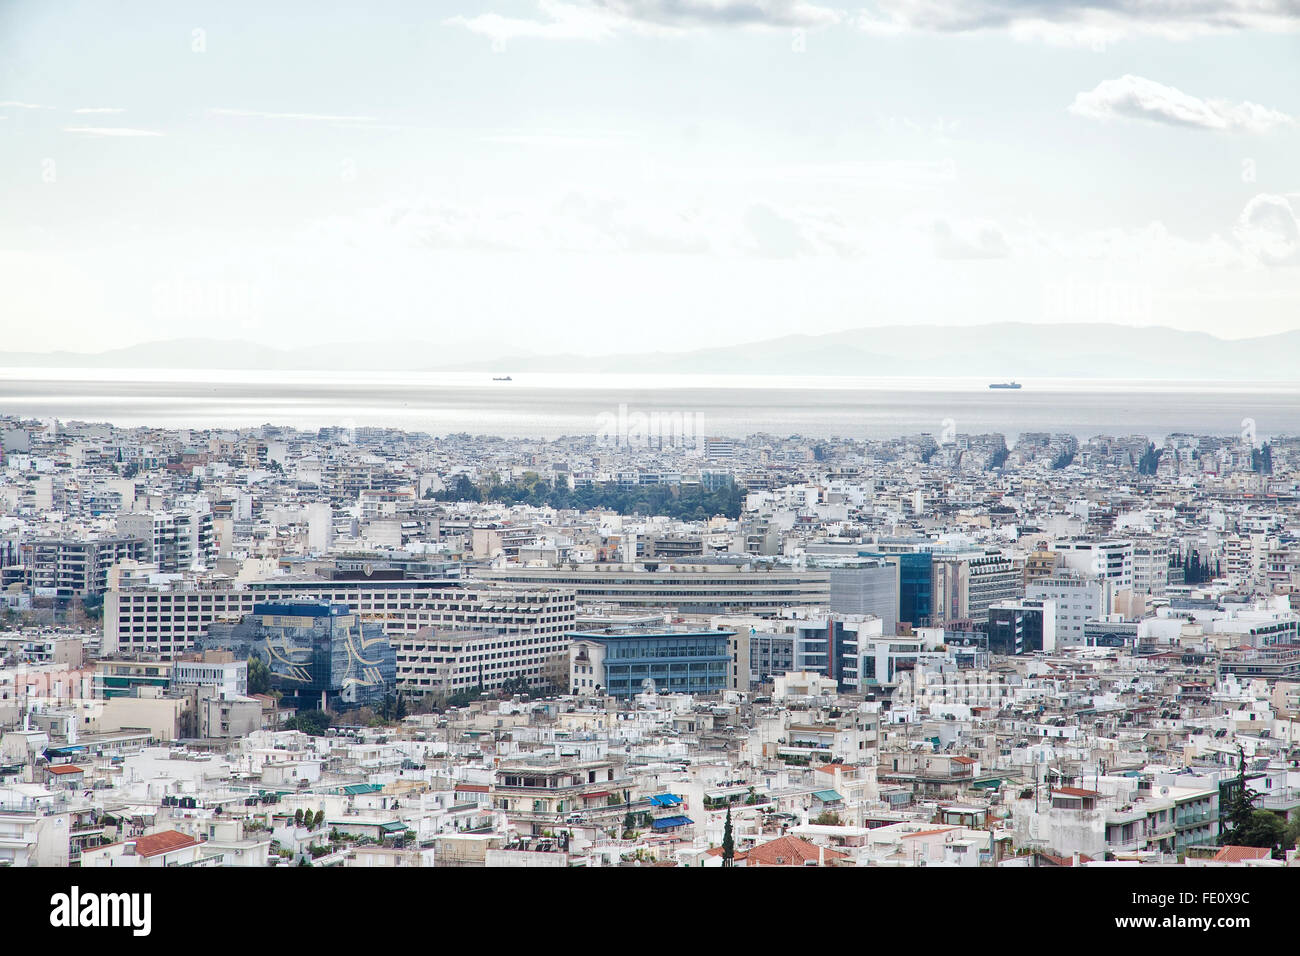 Piraeus is a port city in the region of Attica, Greece. Piraeus is located within the Athens urban area. Stock Photo